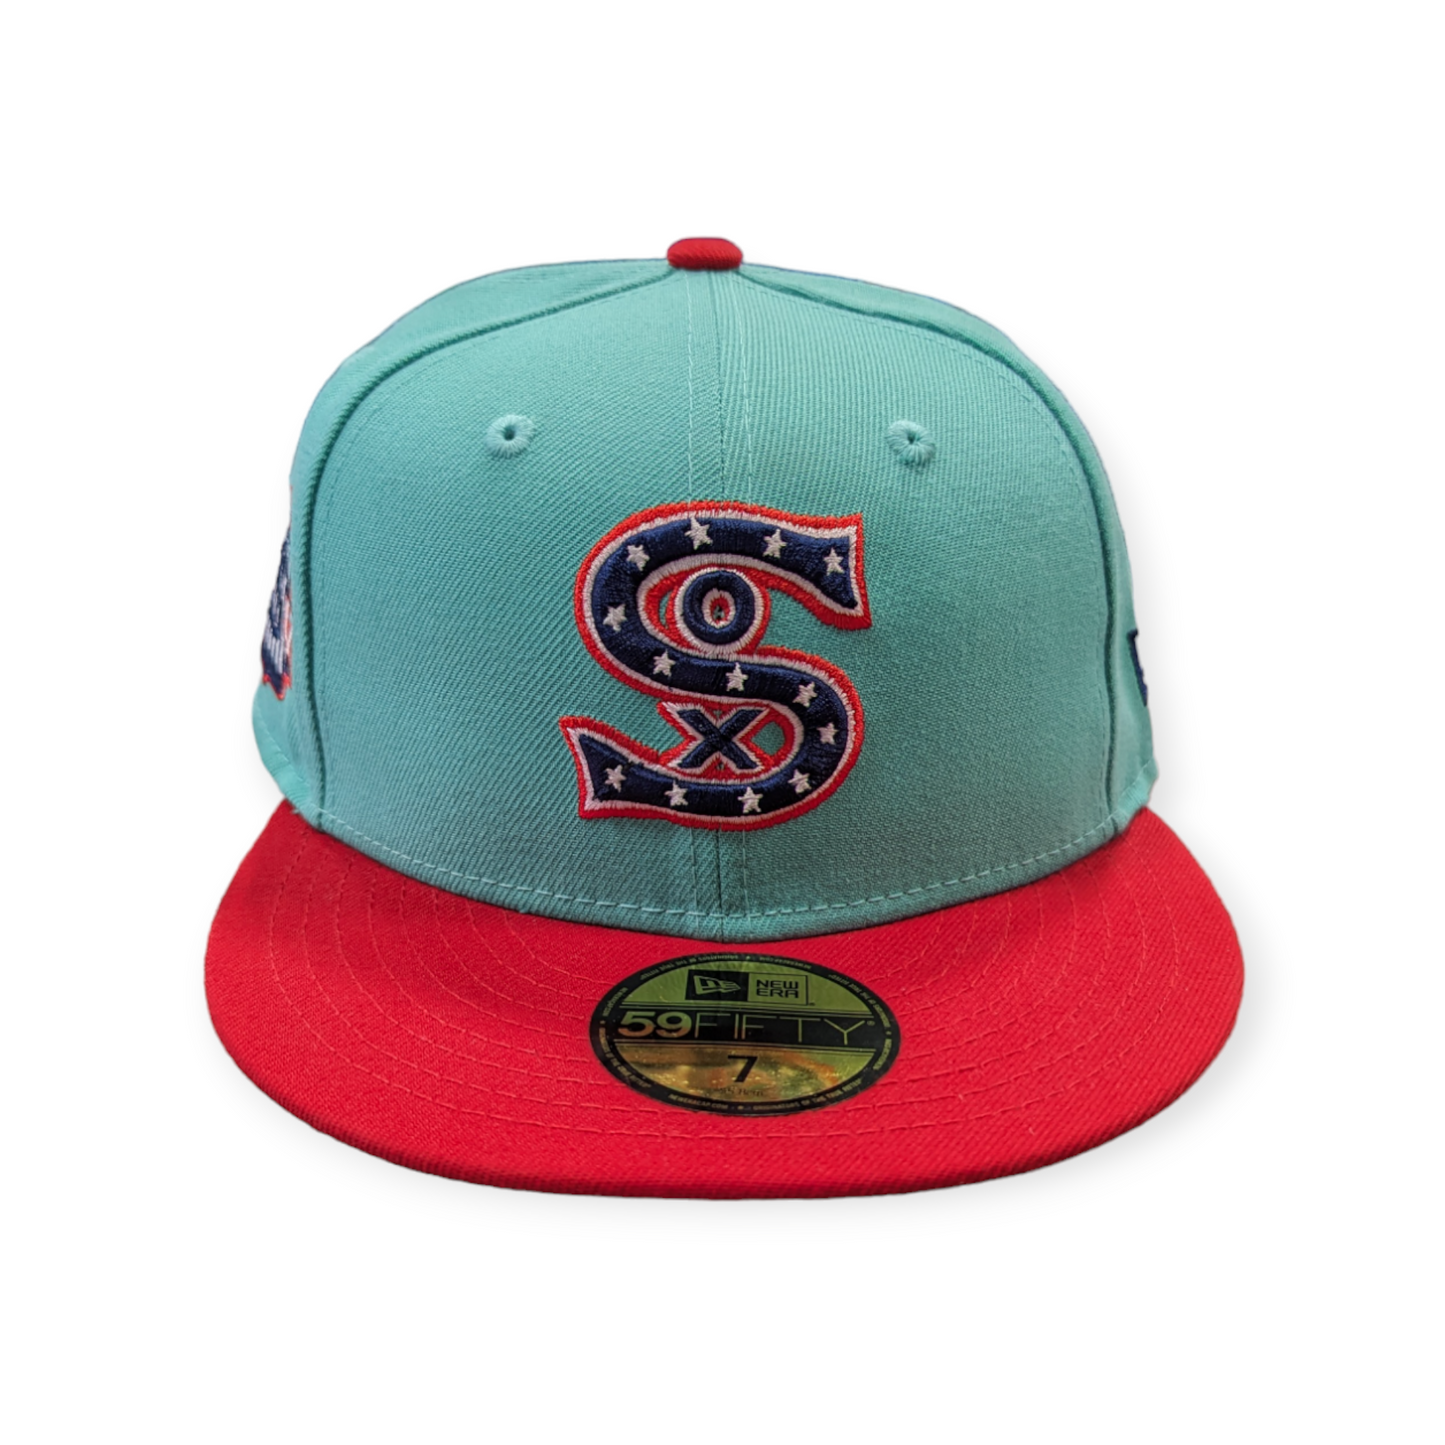 Chicago White Sox 1917 New Era 2 Tone Mint/Red 59FIFTY Fitted Hat